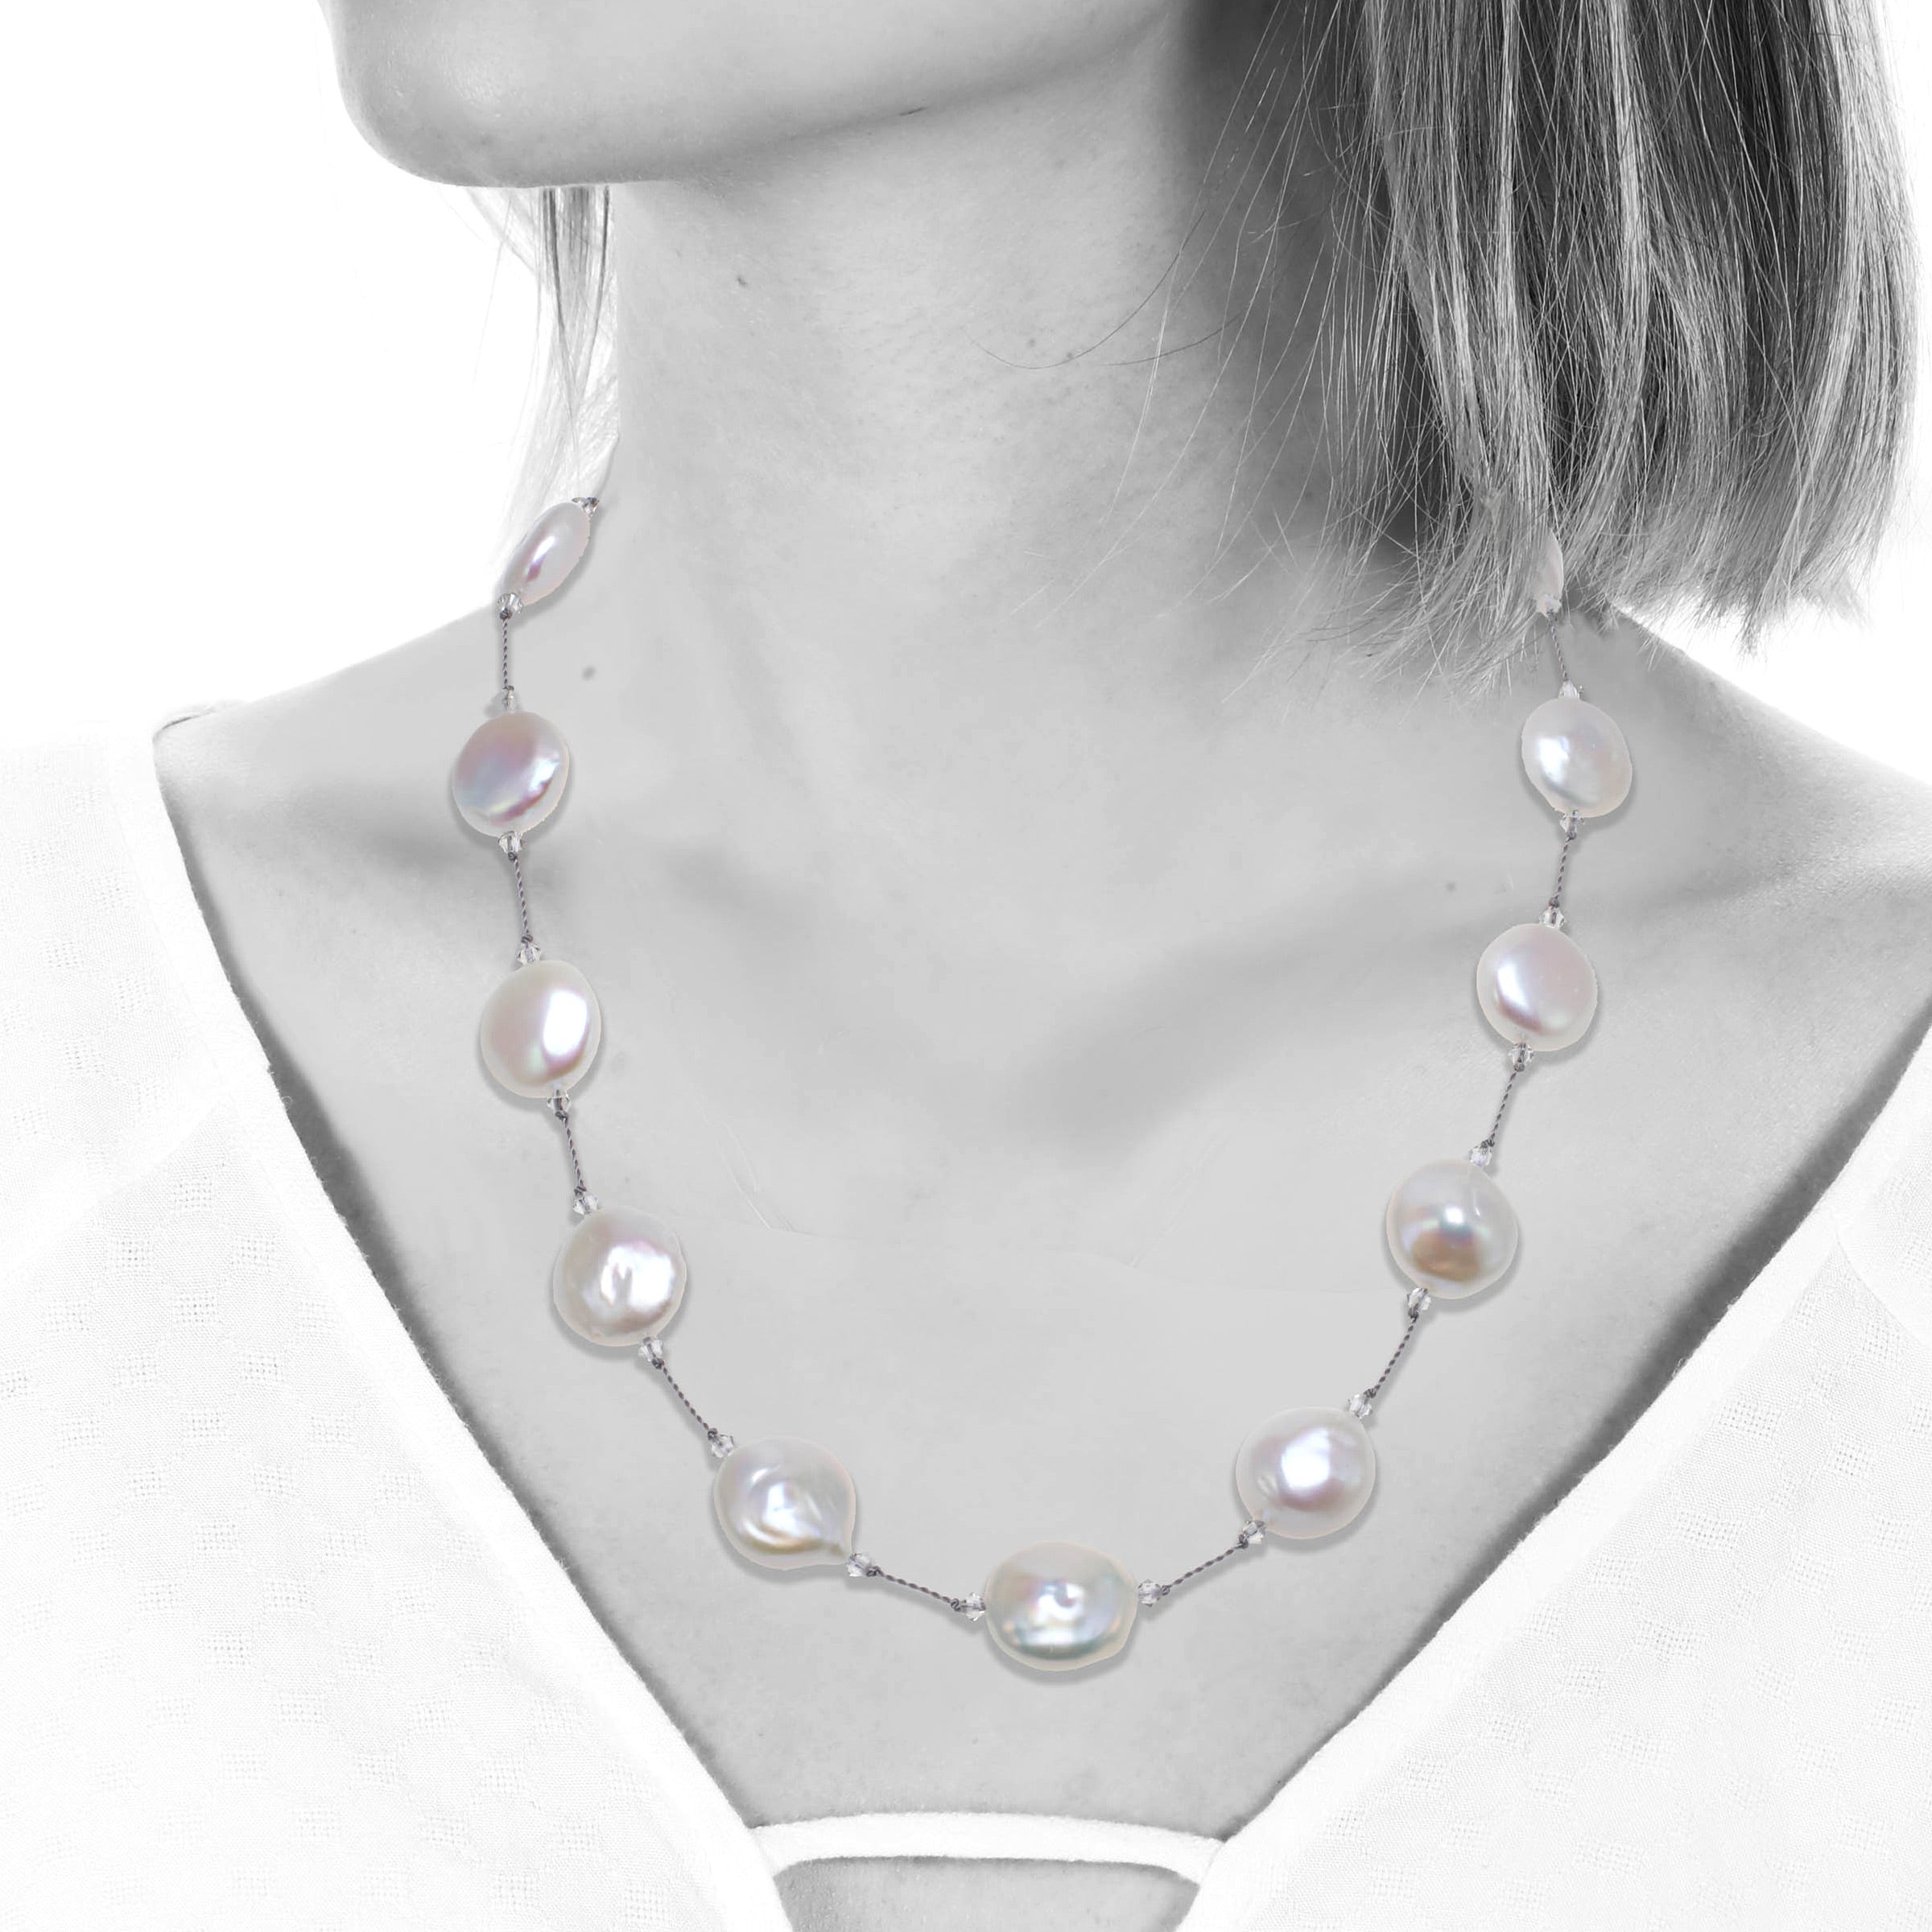 Ladies Sterling Silver Double Row Crystal Necklace at Fraser Hart